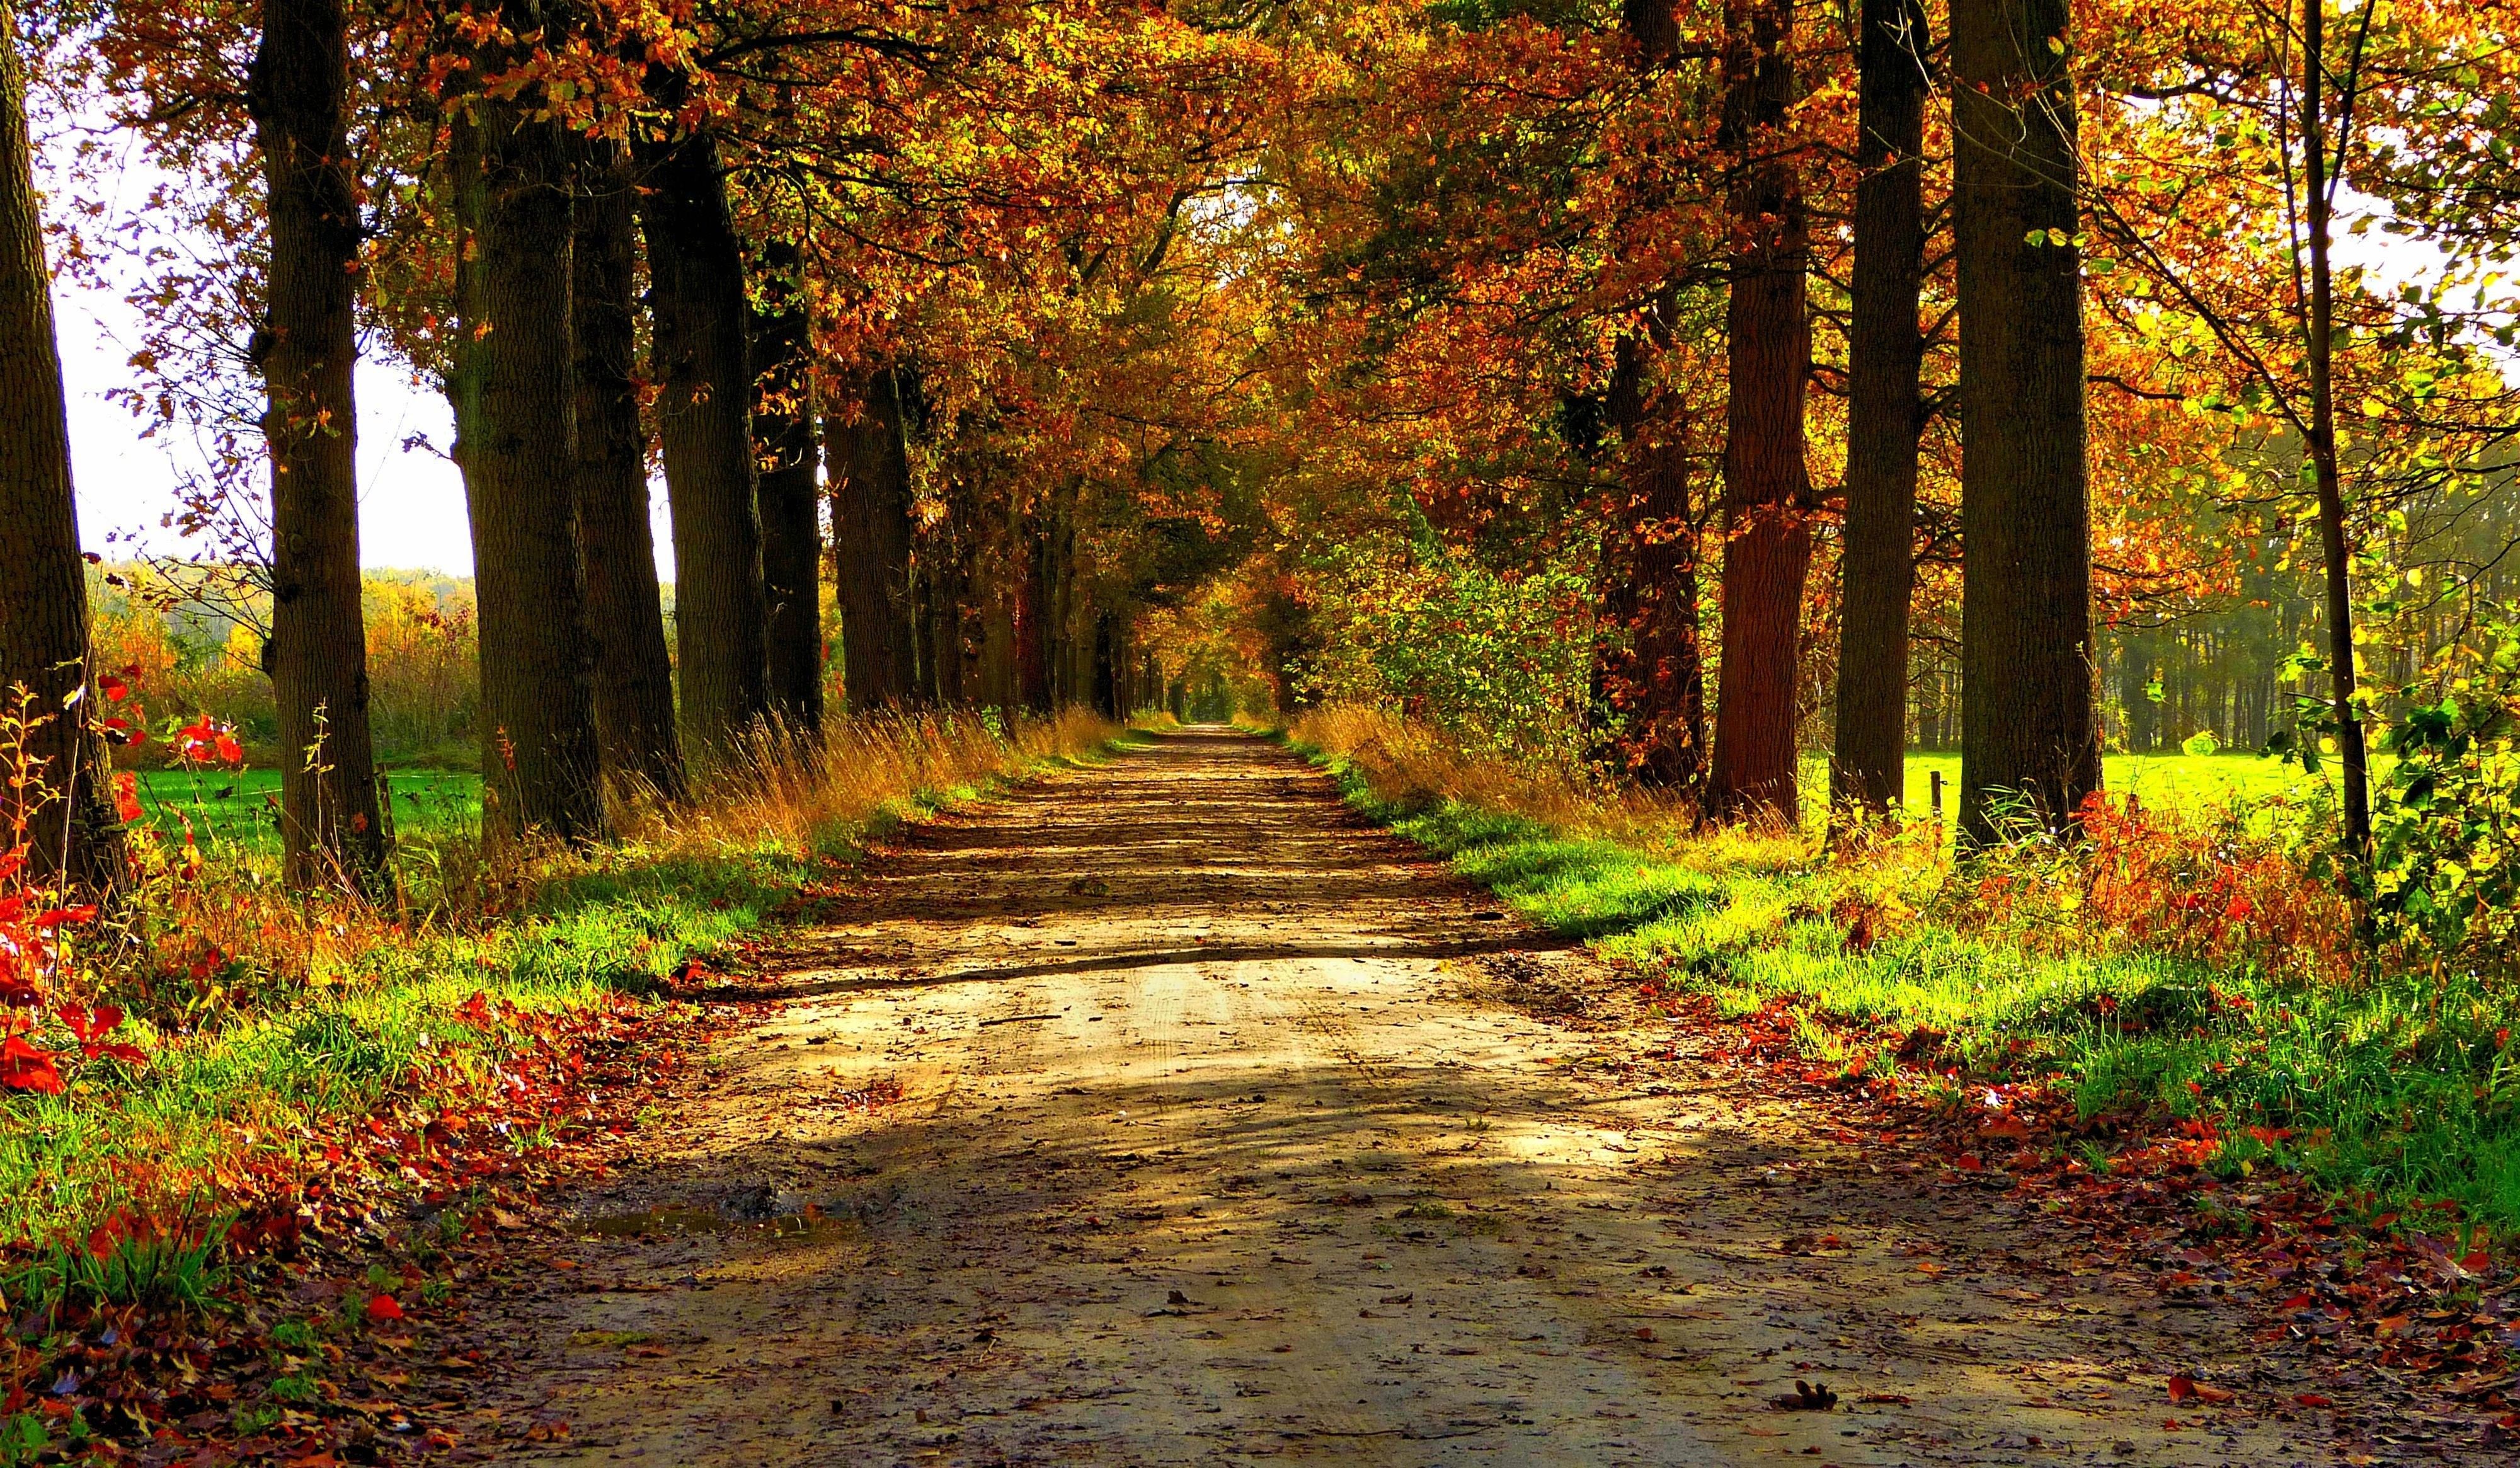 iPhone, Park, autumn, amazing, Trees, Leaves, Samsung, Forest, Colorful, Road Wallpaper, Background, Nature, Path